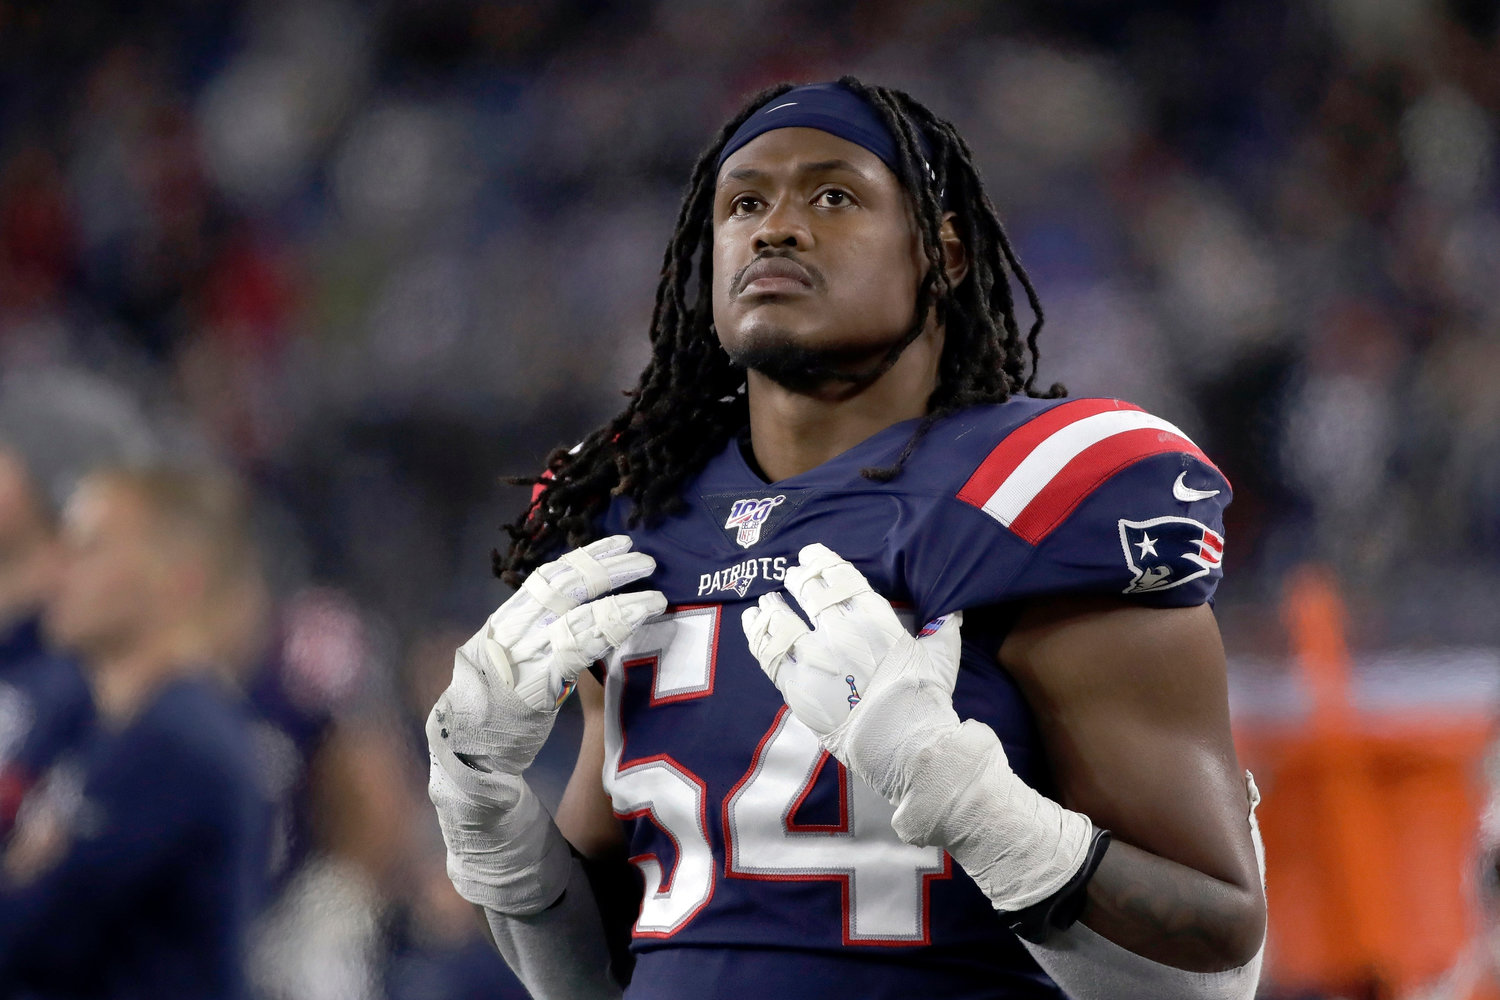 After spending the past decade with the New England Patriots, Dont’a Hightower has retired from the NFL.